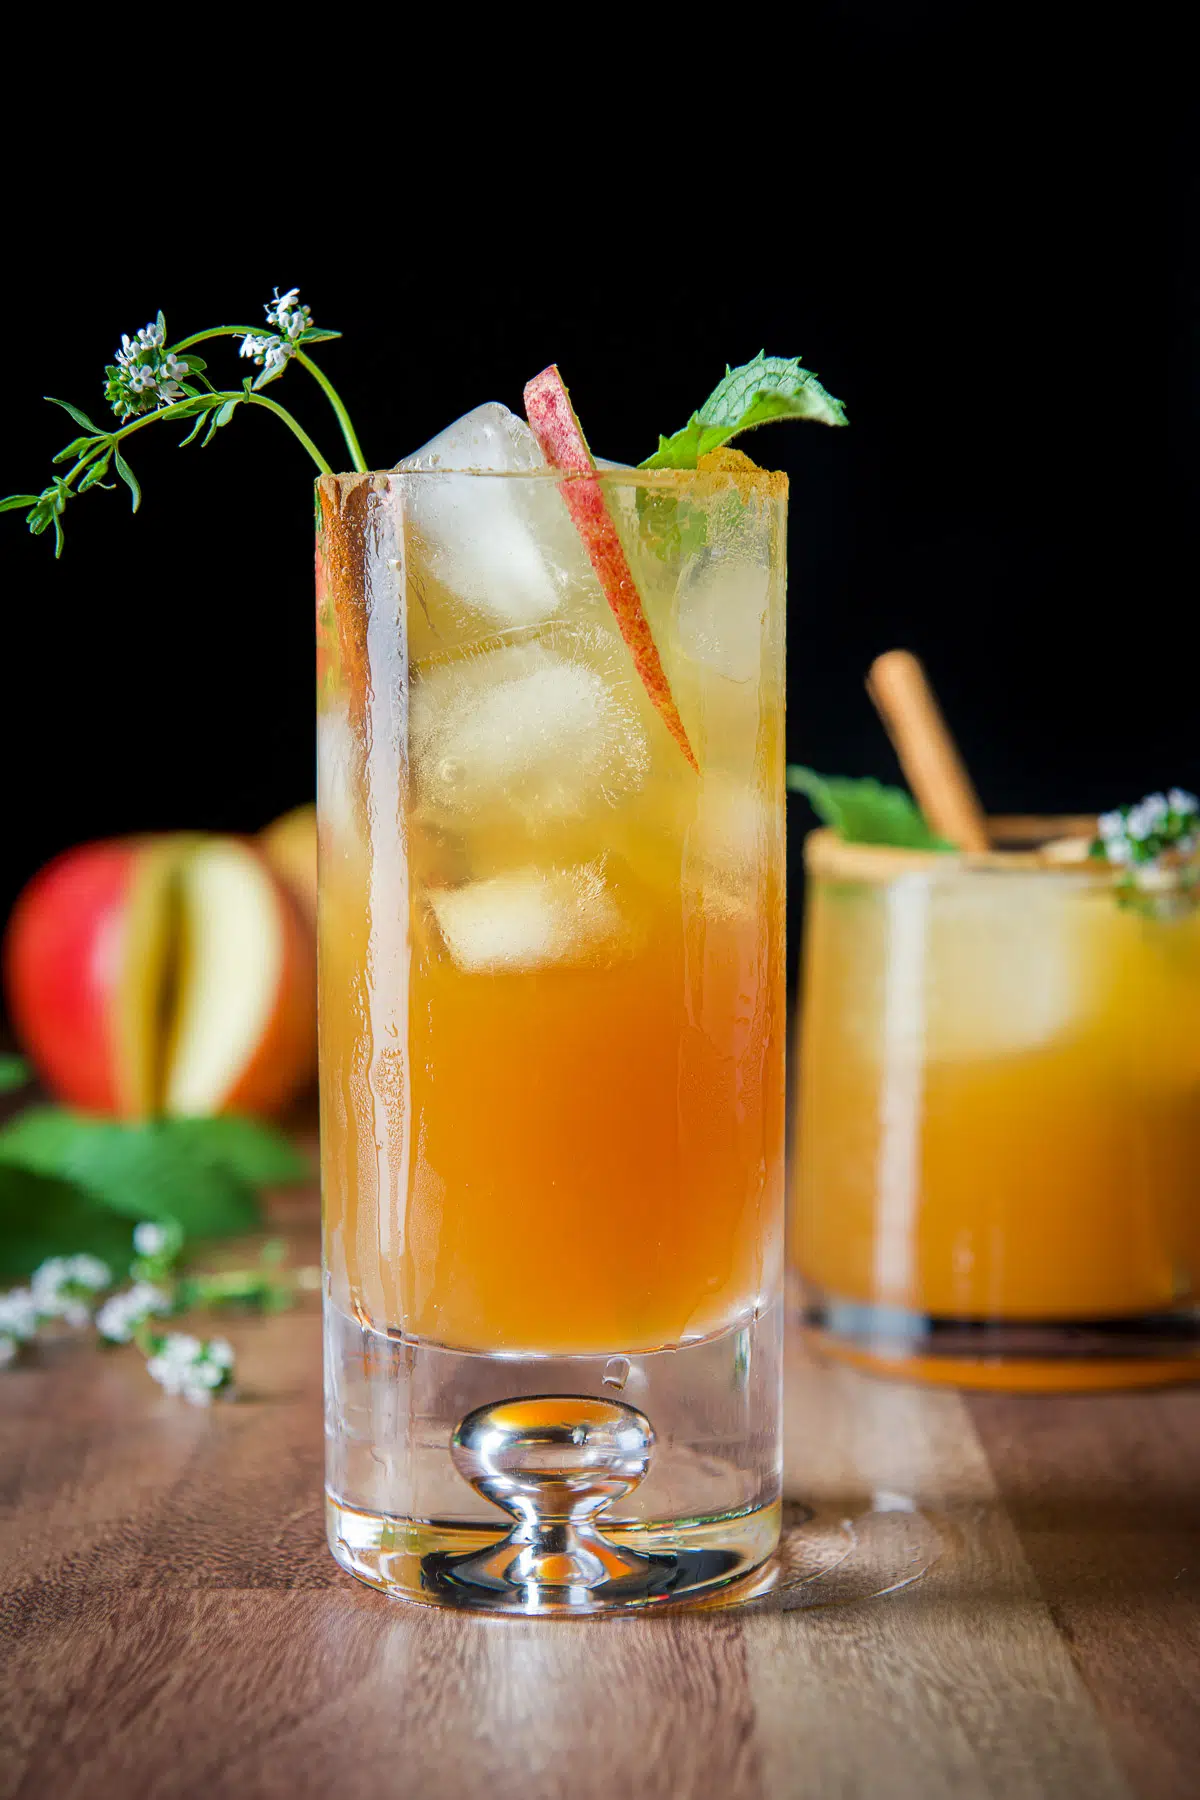 Tall glass with the apple cider drink in it with mint, thyme, and apple slices garnish